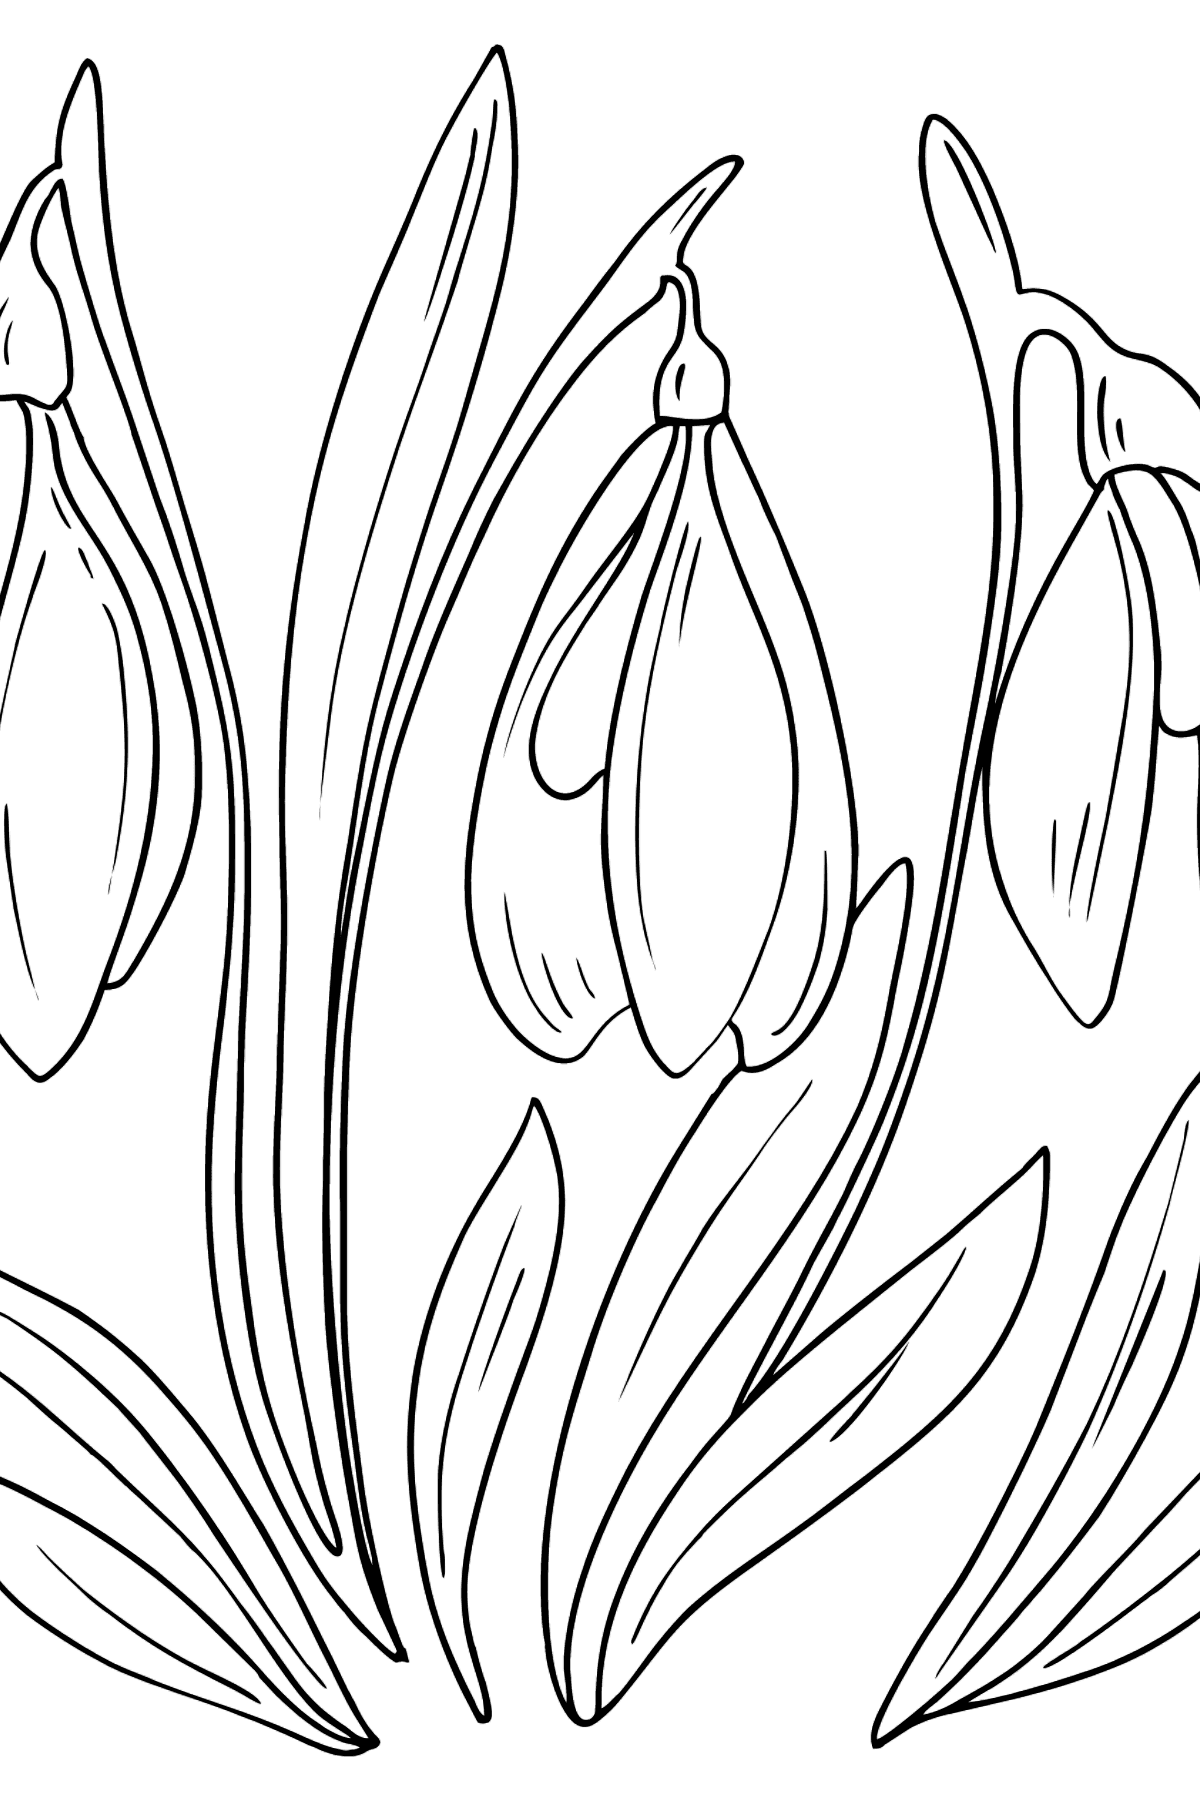 Snowdrops Coloring Page - Coloring Pages for Kids